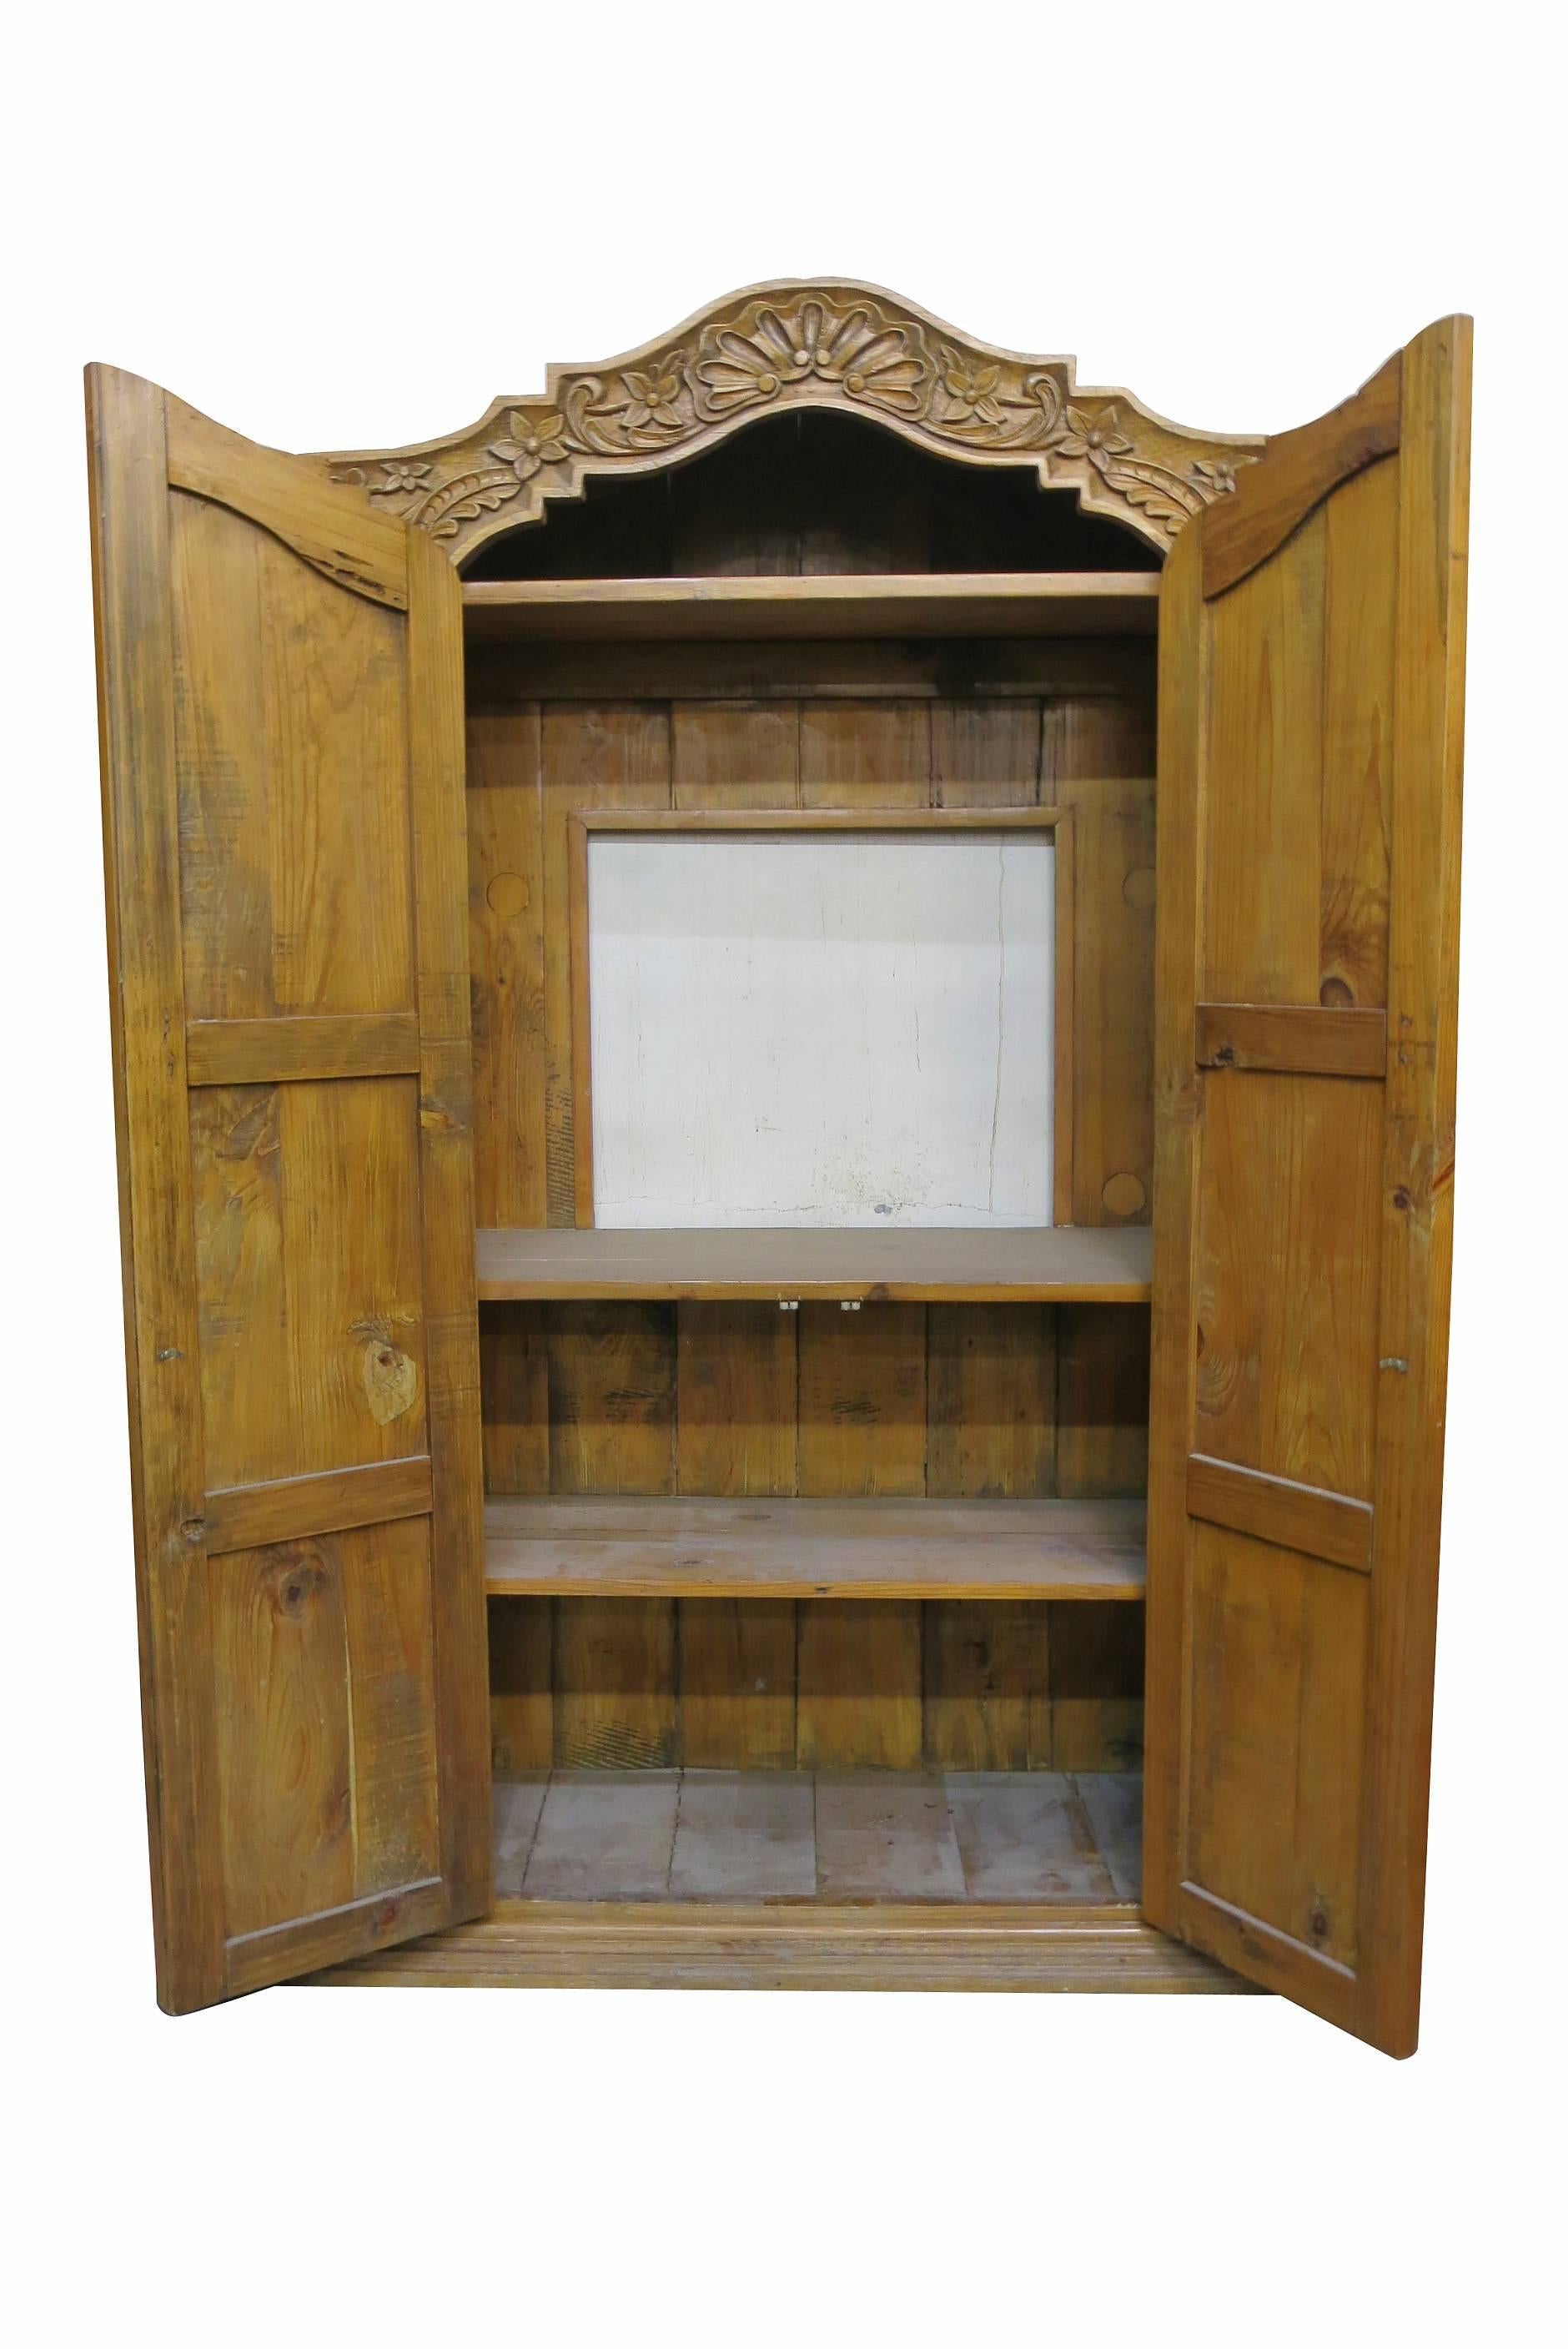 Beautiful hand carved wardrobe TV cabinet made from repurposed antique wood. This Cabinet opens with a middle TV Shelf with an additional top shelf for a Roku/DVD/Cable Box and two bottom selves for storage or additional components.  